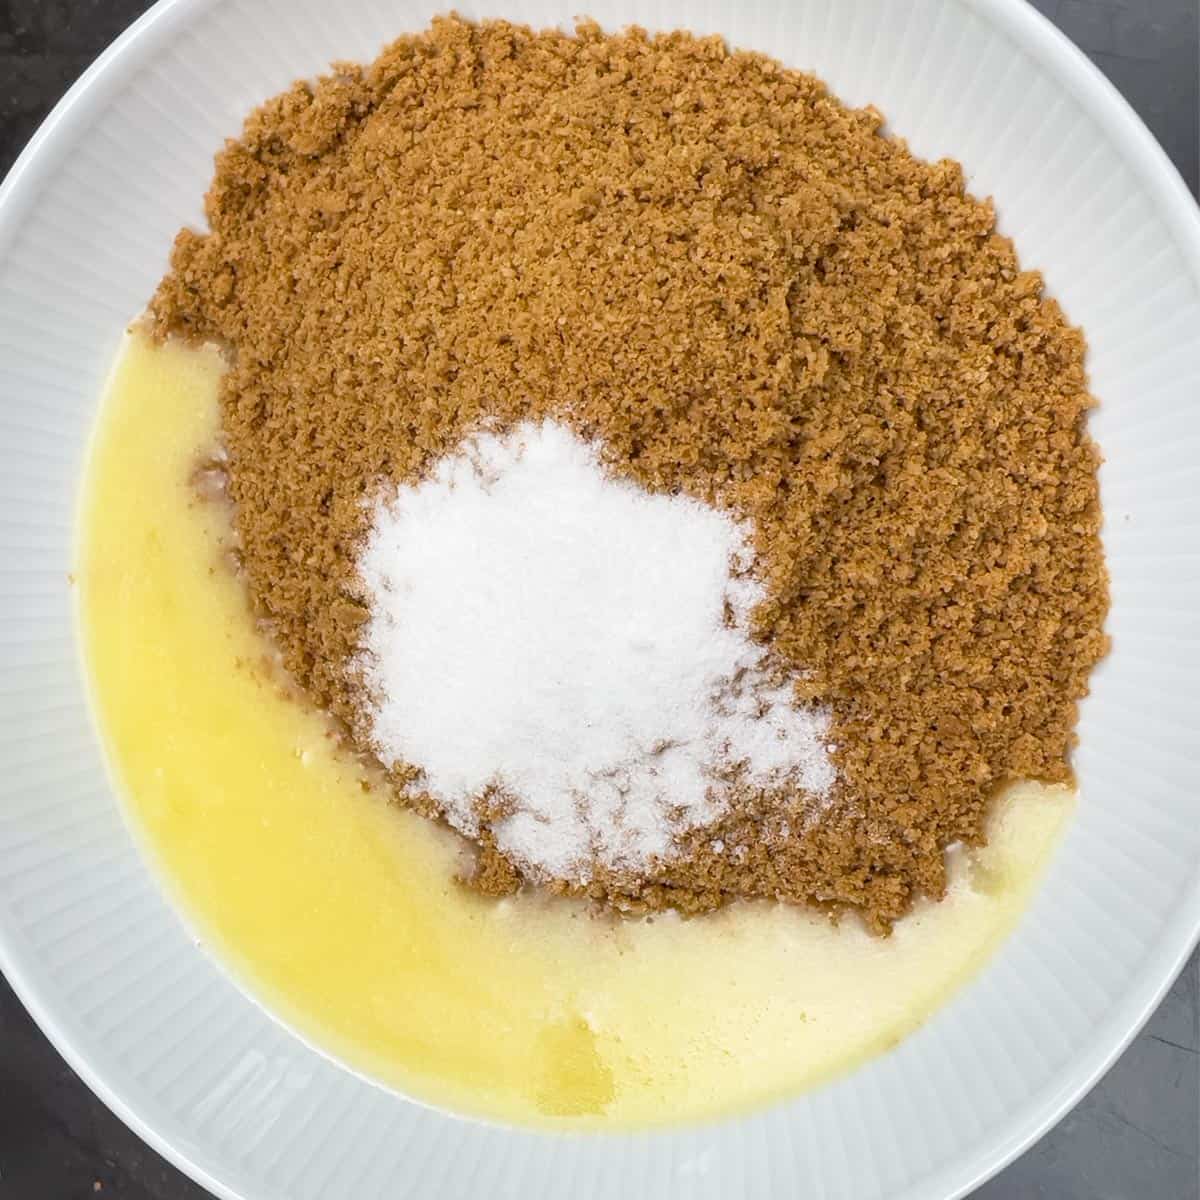 Graham cracker crumble in a dish along with melted butter and sugar to be mixed.